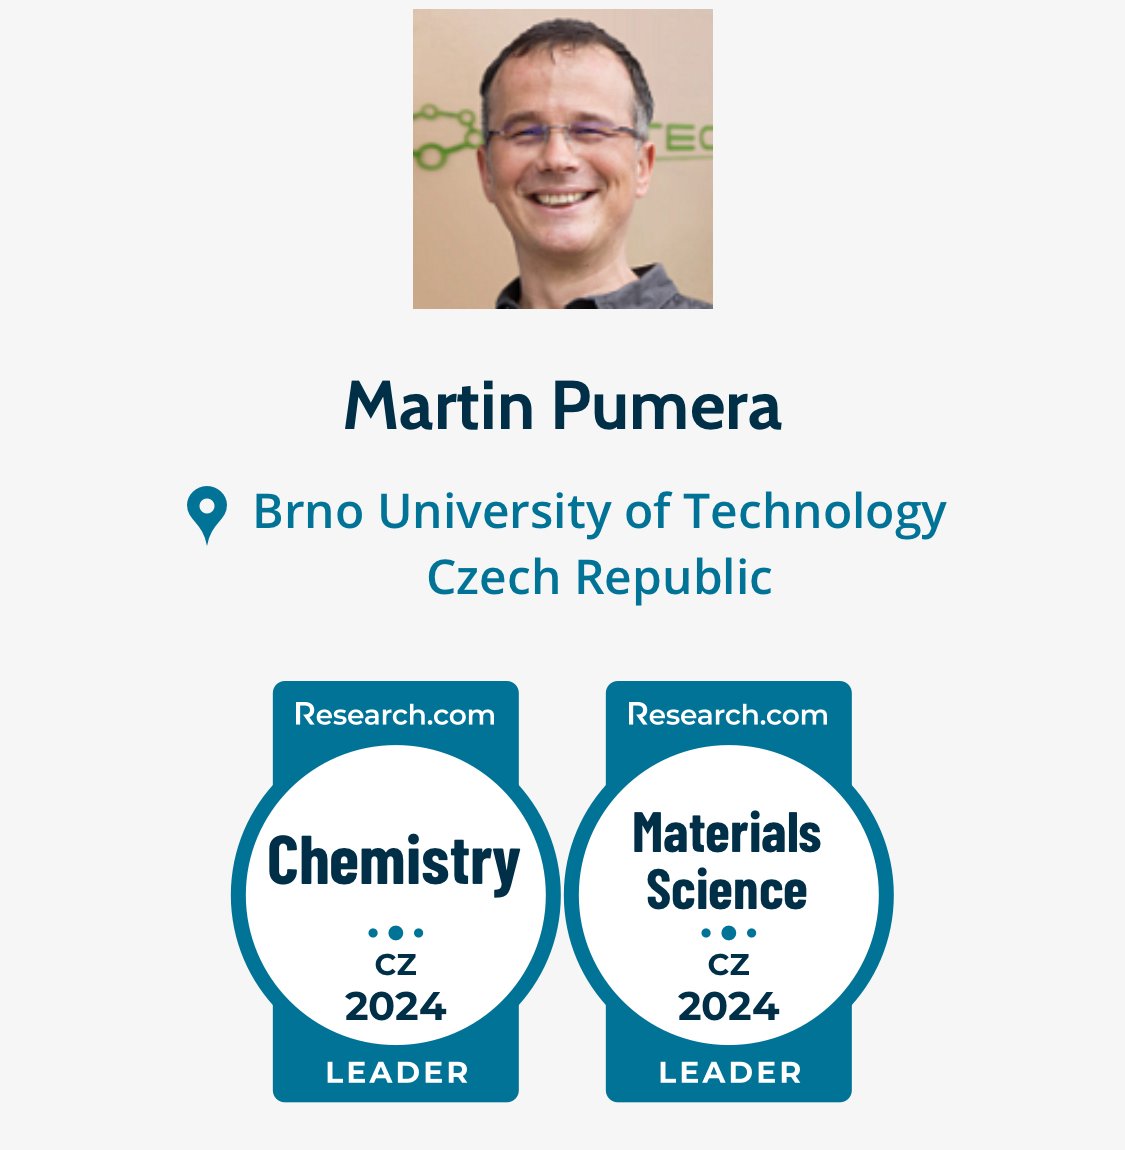 Hard work of @PumeraGroup pays off. We are #1 in Materials Science, #2 in Chemistry in #Czechia and #402 worldwide. Remember, It's not about money. It's about the people you have, how you're led, and how much you get it.